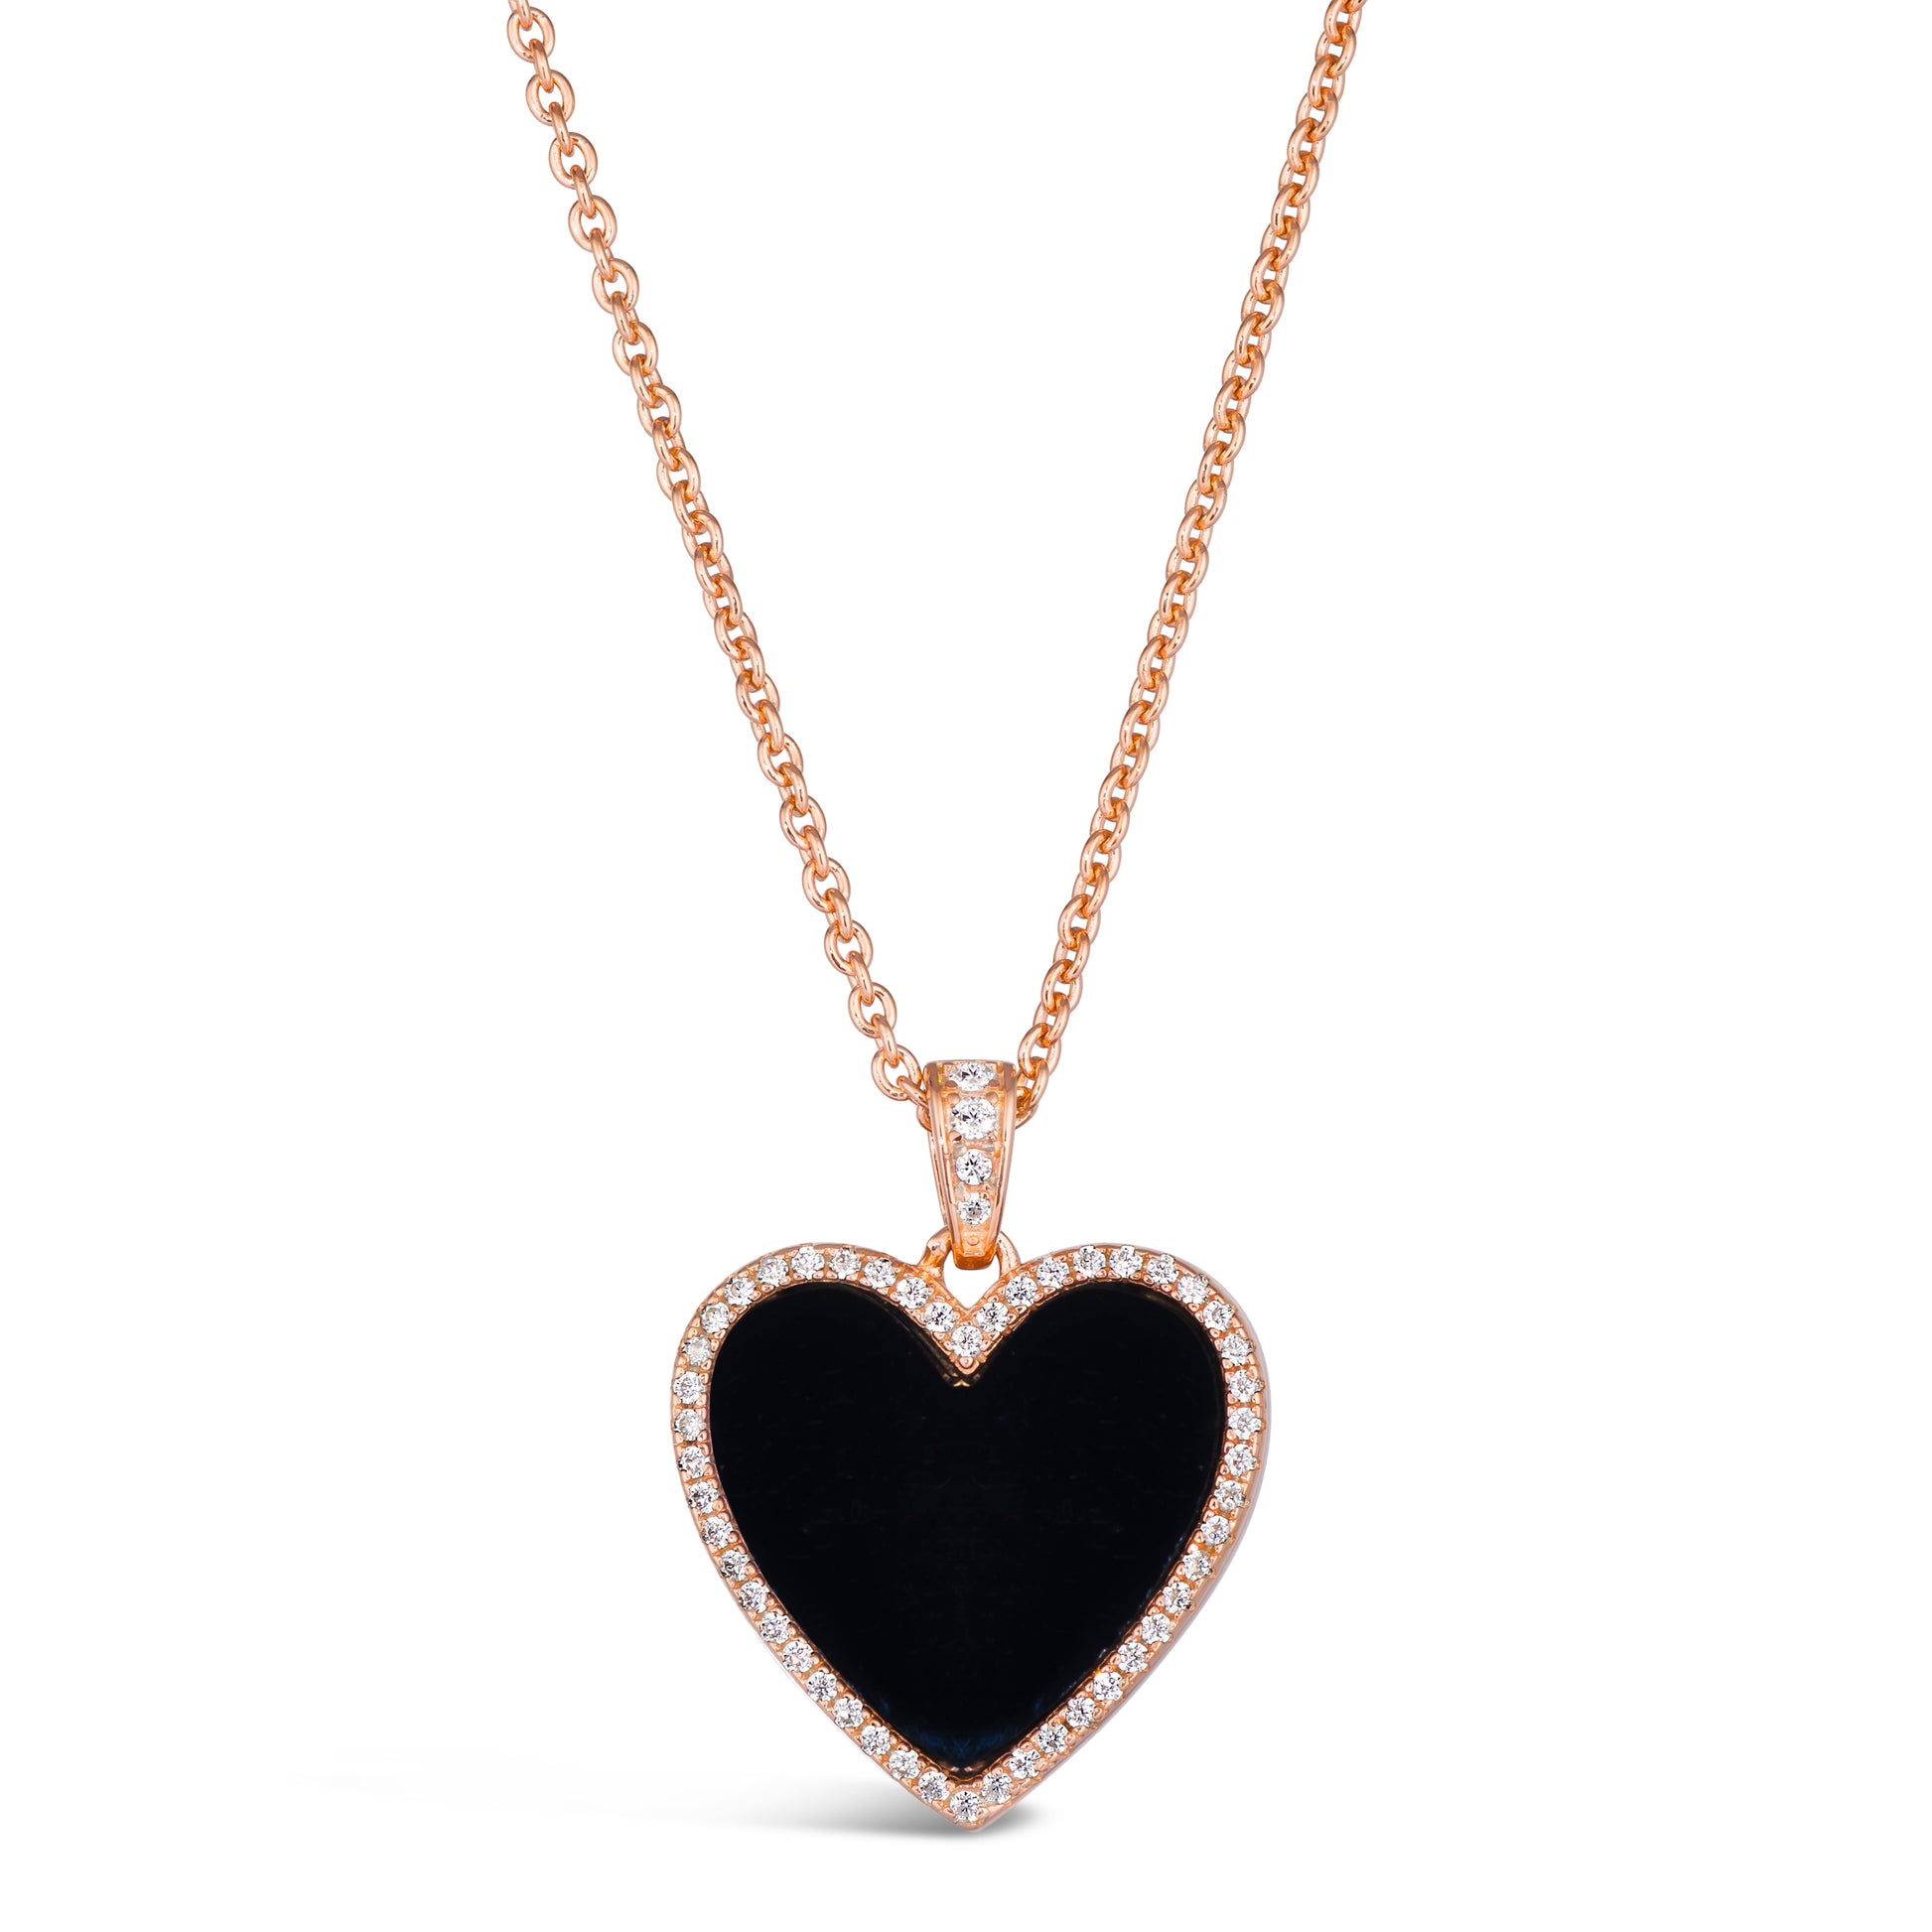 House of Cards 03 Onyx Necklace - Anna Zuckerman Luxury Necklaces